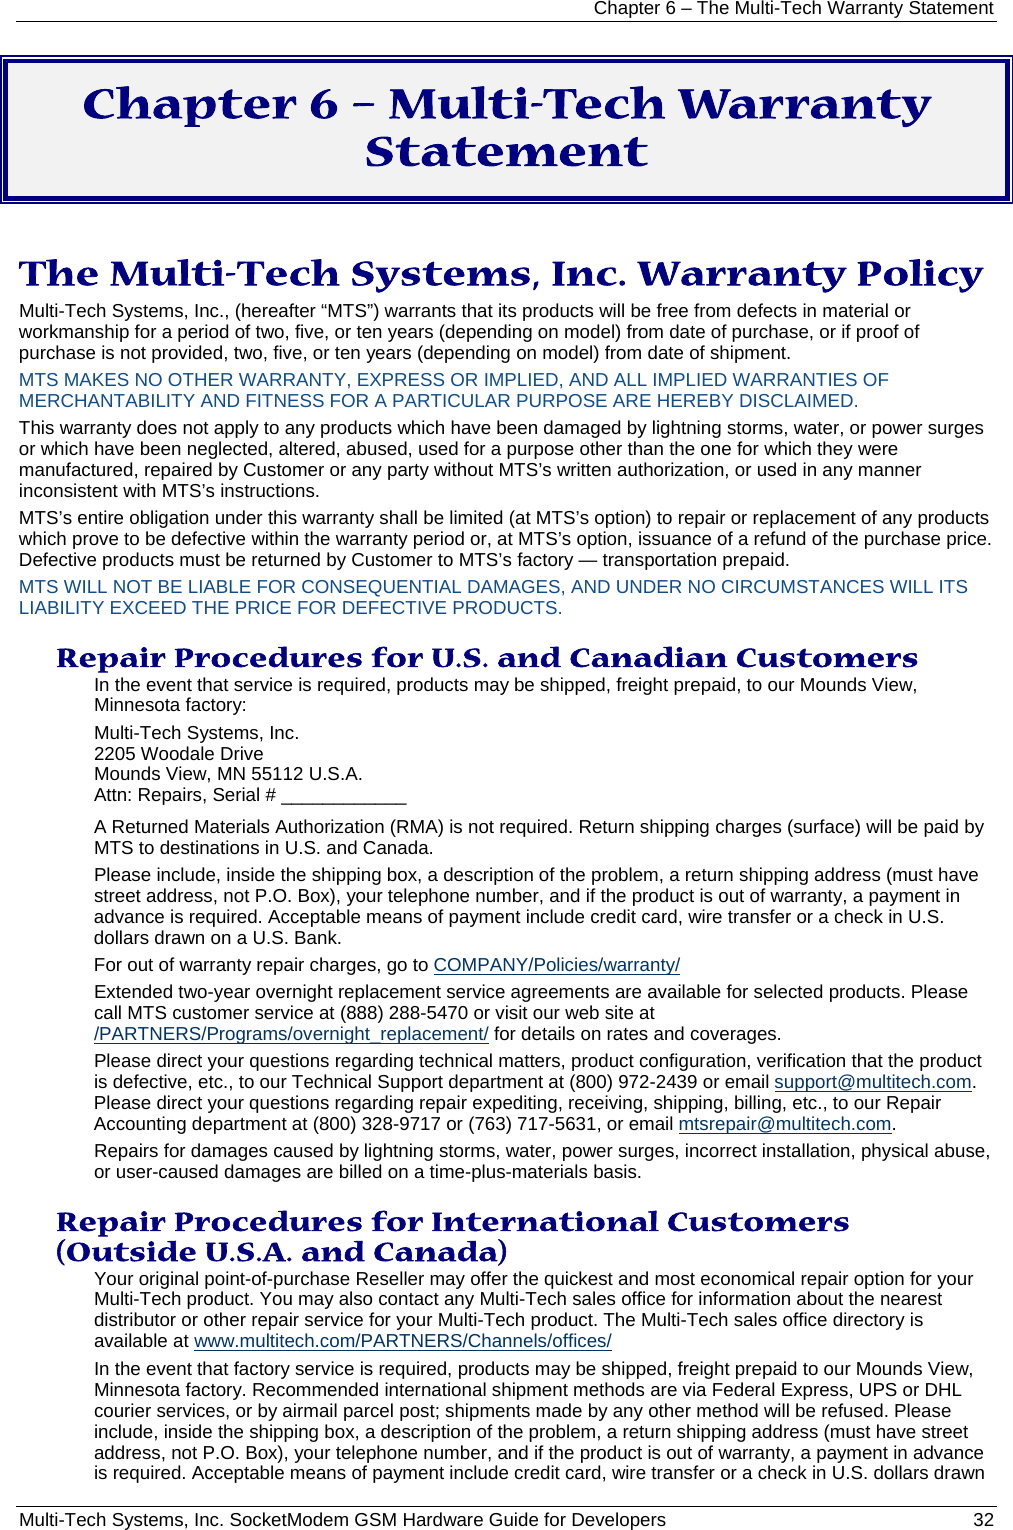 Chapter 6 – The Multi-Tech Warranty Statement Multi-Tech Systems, Inc. SocketModem GSM Hardware Guide for Developers   32  Chapter 6 – Multi-Tech Warranty Statement  The Multi-Tech Systems, Inc. Warranty Policy Multi-Tech Systems, Inc., (hereafter “MTS”) warrants that its products will be free from defects in material or workmanship for a period of two, five, or ten years (depending on model) from date of purchase, or if proof of purchase is not provided, two, five, or ten years (depending on model) from date of shipment.  MTS MAKES NO OTHER WARRANTY, EXPRESS OR IMPLIED, AND ALL IMPLIED WARRANTIES OF MERCHANTABILITY AND FITNESS FOR A PARTICULAR PURPOSE ARE HEREBY DISCLAIMED. This warranty does not apply to any products which have been damaged by lightning storms, water, or power surges or which have been neglected, altered, abused, used for a purpose other than the one for which they were manufactured, repaired by Customer or any party without MTS’s written authorization, or used in any manner inconsistent with MTS’s instructions.  MTS’s entire obligation under this warranty shall be limited (at MTS’s option) to repair or replacement of any products which prove to be defective within the warranty period or, at MTS’s option, issuance of a refund of the purchase price. Defective products must be returned by Customer to MTS’s factory — transportation prepaid.  MTS WILL NOT BE LIABLE FOR CONSEQUENTIAL DAMAGES, AND UNDER NO CIRCUMSTANCES WILL ITS LIABILITY EXCEED THE PRICE FOR DEFECTIVE PRODUCTS.  Repair Procedures for U.S. and Canadian Customers In the event that service is required, products may be shipped, freight prepaid, to our Mounds View, Minnesota factory:  Multi-Tech Systems, Inc.  2205 Woodale Drive  Mounds View, MN 55112 U.S.A. Attn: Repairs, Serial # ____________  A Returned Materials Authorization (RMA) is not required. Return shipping charges (surface) will be paid by MTS to destinations in U.S. and Canada. Please include, inside the shipping box, a description of the problem, a return shipping address (must have street address, not P.O. Box), your telephone number, and if the product is out of warranty, a payment in advance is required. Acceptable means of payment include credit card, wire transfer or a check in U.S. dollars drawn on a U.S. Bank.  For out of warranty repair charges, go to COMPANY/Policies/warranty/  Extended two-year overnight replacement service agreements are available for selected products. Please call MTS customer service at (888) 288-5470 or visit our web site at /PARTNERS/Programs/overnight_replacement/ for details on rates and coverages.  Please direct your questions regarding technical matters, product configuration, verification that the product is defective, etc., to our Technical Support department at (800) 972-2439 or email support@multitech.com. Please direct your questions regarding repair expediting, receiving, shipping, billing, etc., to our Repair Accounting department at (800) 328-9717 or (763) 717-5631, or email mtsrepair@multitech.com.  Repairs for damages caused by lightning storms, water, power surges, incorrect installation, physical abuse, or user-caused damages are billed on a time-plus-materials basis.  Repair Procedures for International Customers (Outside U.S.A. and Canada)  Your original point-of-purchase Reseller may offer the quickest and most economical repair option for your Multi-Tech product. You may also contact any Multi-Tech sales office for information about the nearest distributor or other repair service for your Multi-Tech product. The Multi-Tech sales office directory is available at www.multitech.com/PARTNERS/Channels/offices/  In the event that factory service is required, products may be shipped, freight prepaid to our Mounds View, Minnesota factory. Recommended international shipment methods are via Federal Express, UPS or DHL courier services, or by airmail parcel post; shipments made by any other method will be refused. Please include, inside the shipping box, a description of the problem, a return shipping address (must have street address, not P.O. Box), your telephone number, and if the product is out of warranty, a payment in advance is required. Acceptable means of payment include credit card, wire transfer or a check in U.S. dollars drawn 